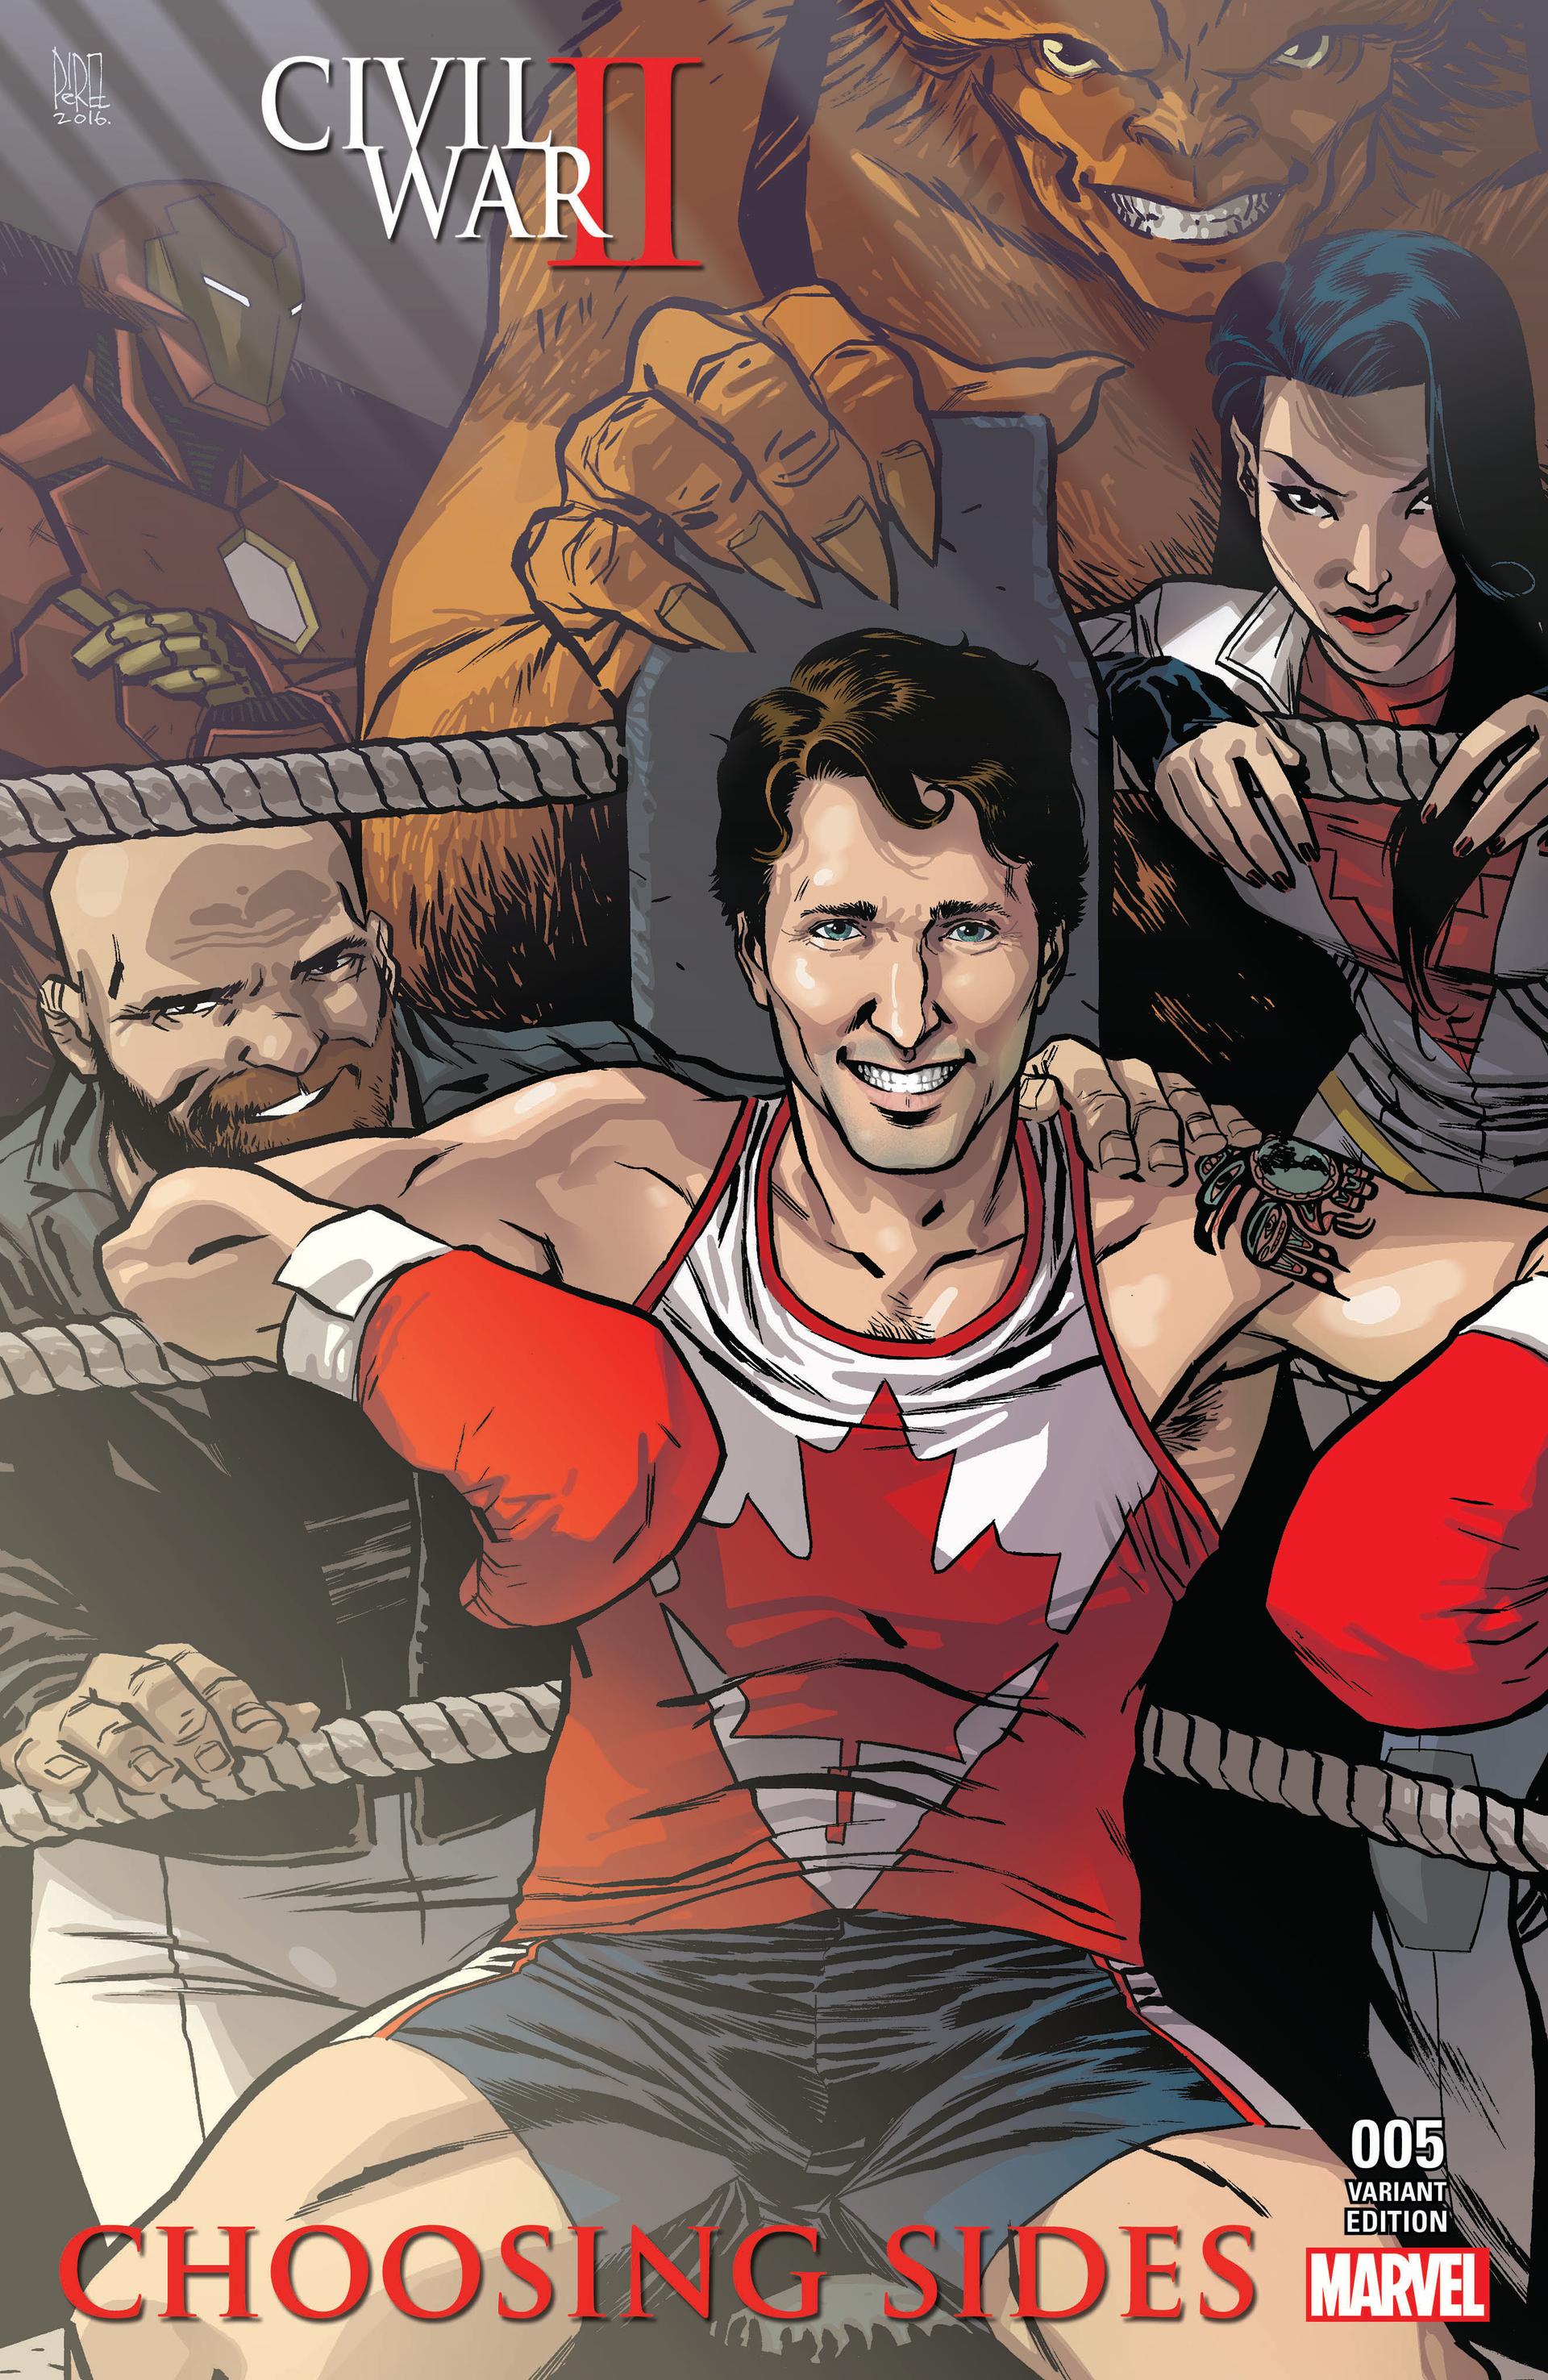 Justin Trudeau's new Marvel cover, which features him in a boxing uniform